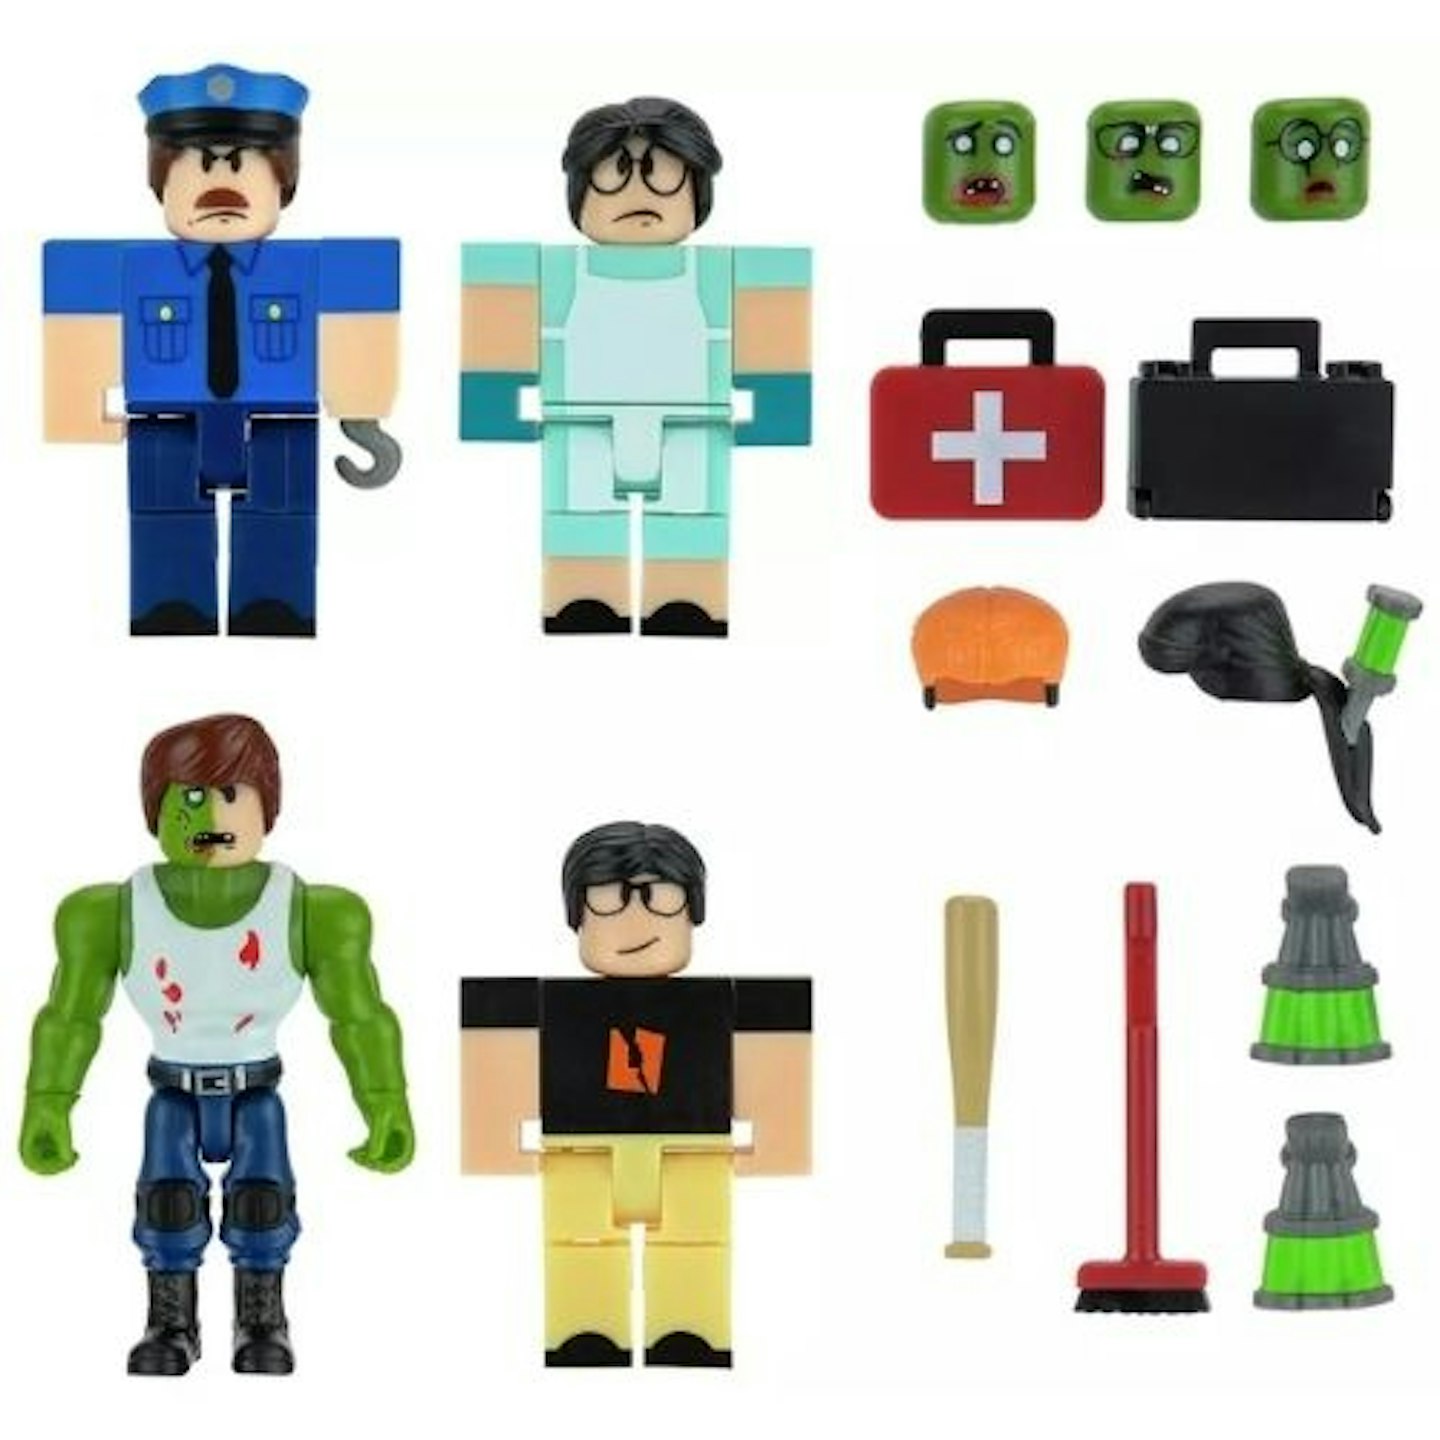 Roblox Toys Come Of Age With Collectable Desktop Series